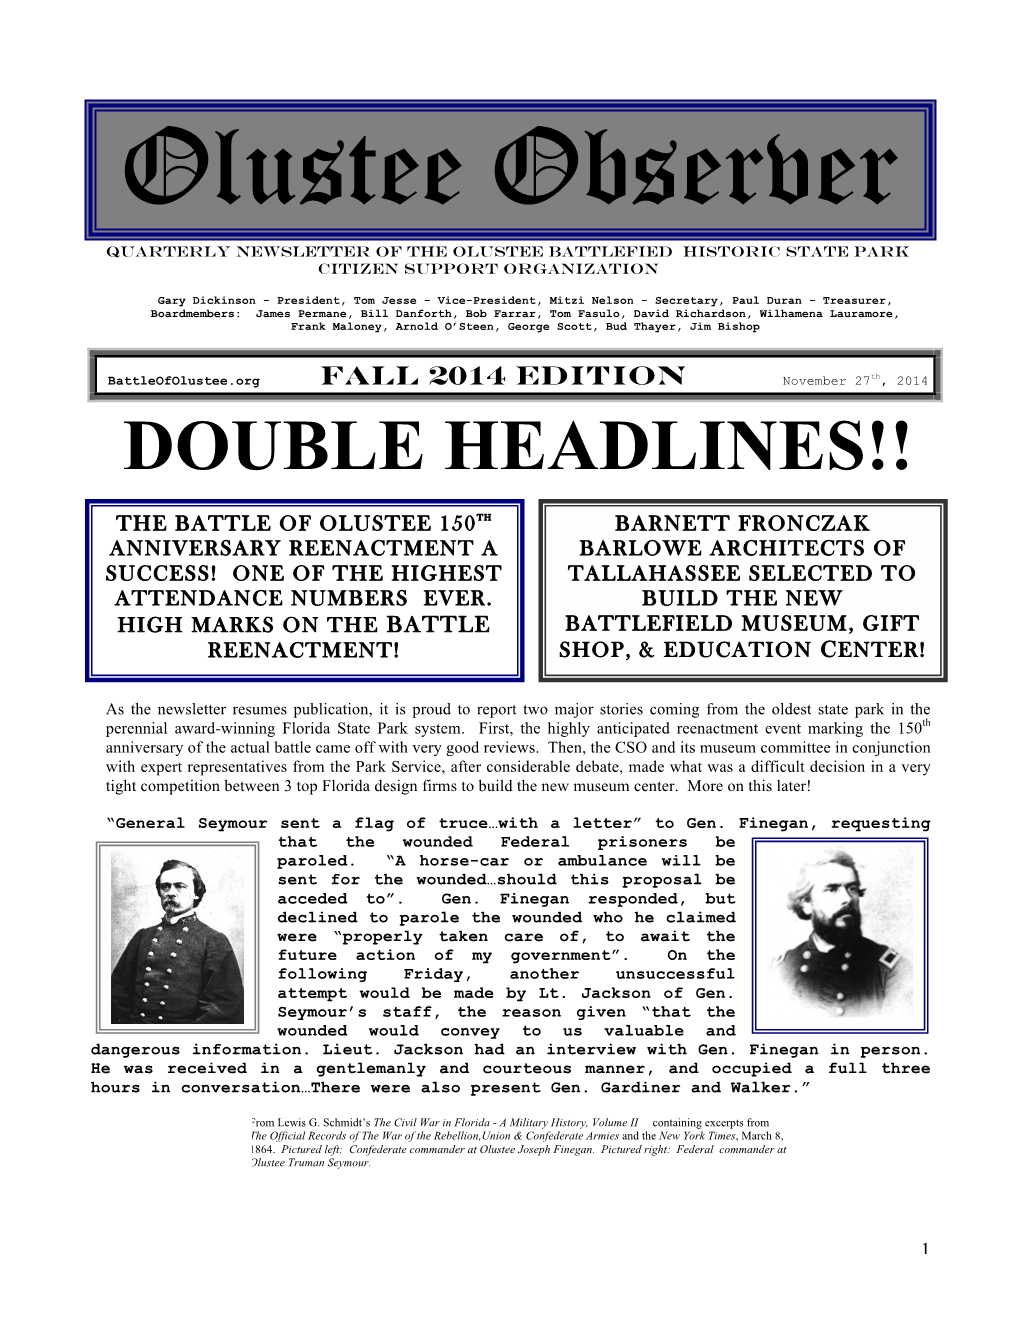 Olustee Observer QUARTERLY NEWSLETTER of the OLUSTEE BATTLEFIED HISTORIC STATE PARK CITIZEN SUPPORT ORGANIZATION